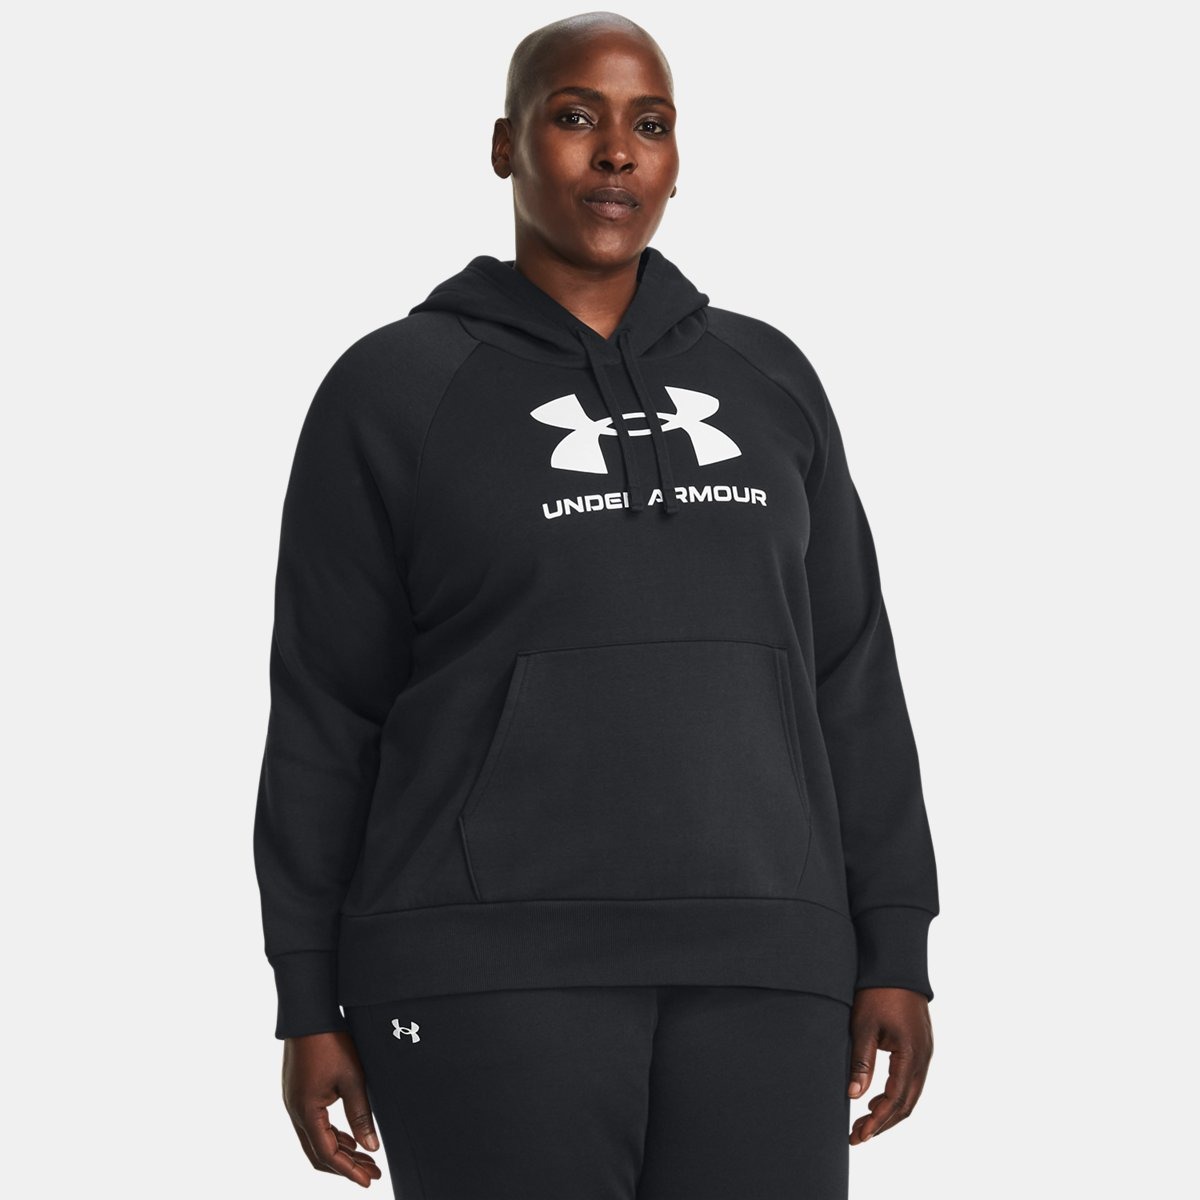 Black Hoodie for Woman at Under Armour GOOFASH